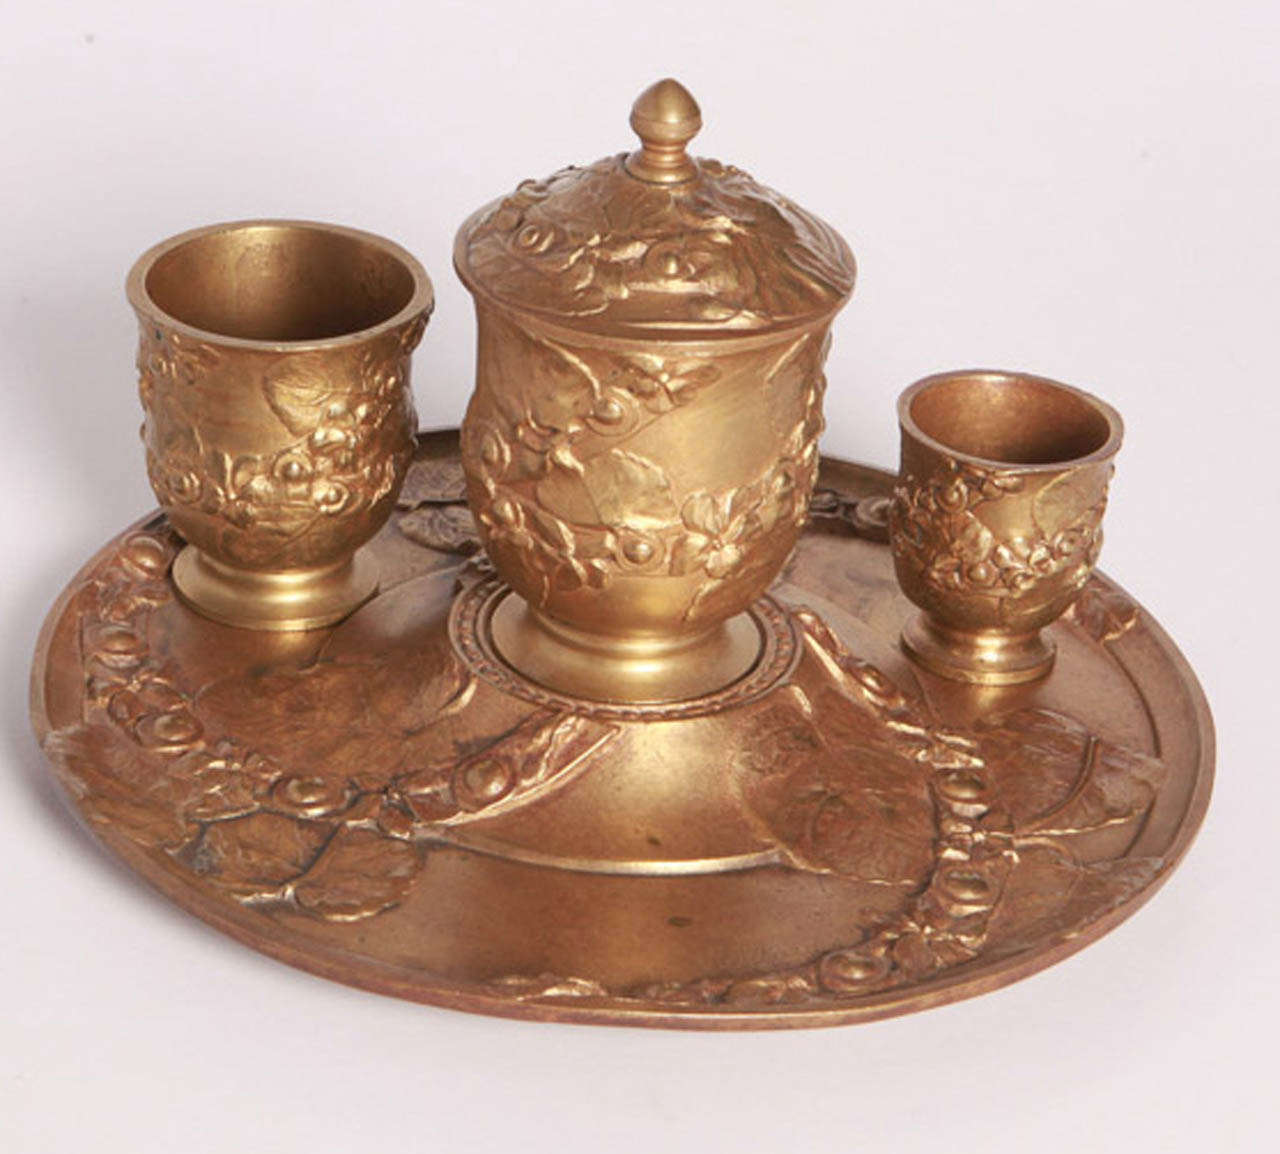 Handmade bronze inkwell consists of three removable cups, the largest of which has a removable top.  Inkwell depicts leaves and flowers.  Signed VieiAard.